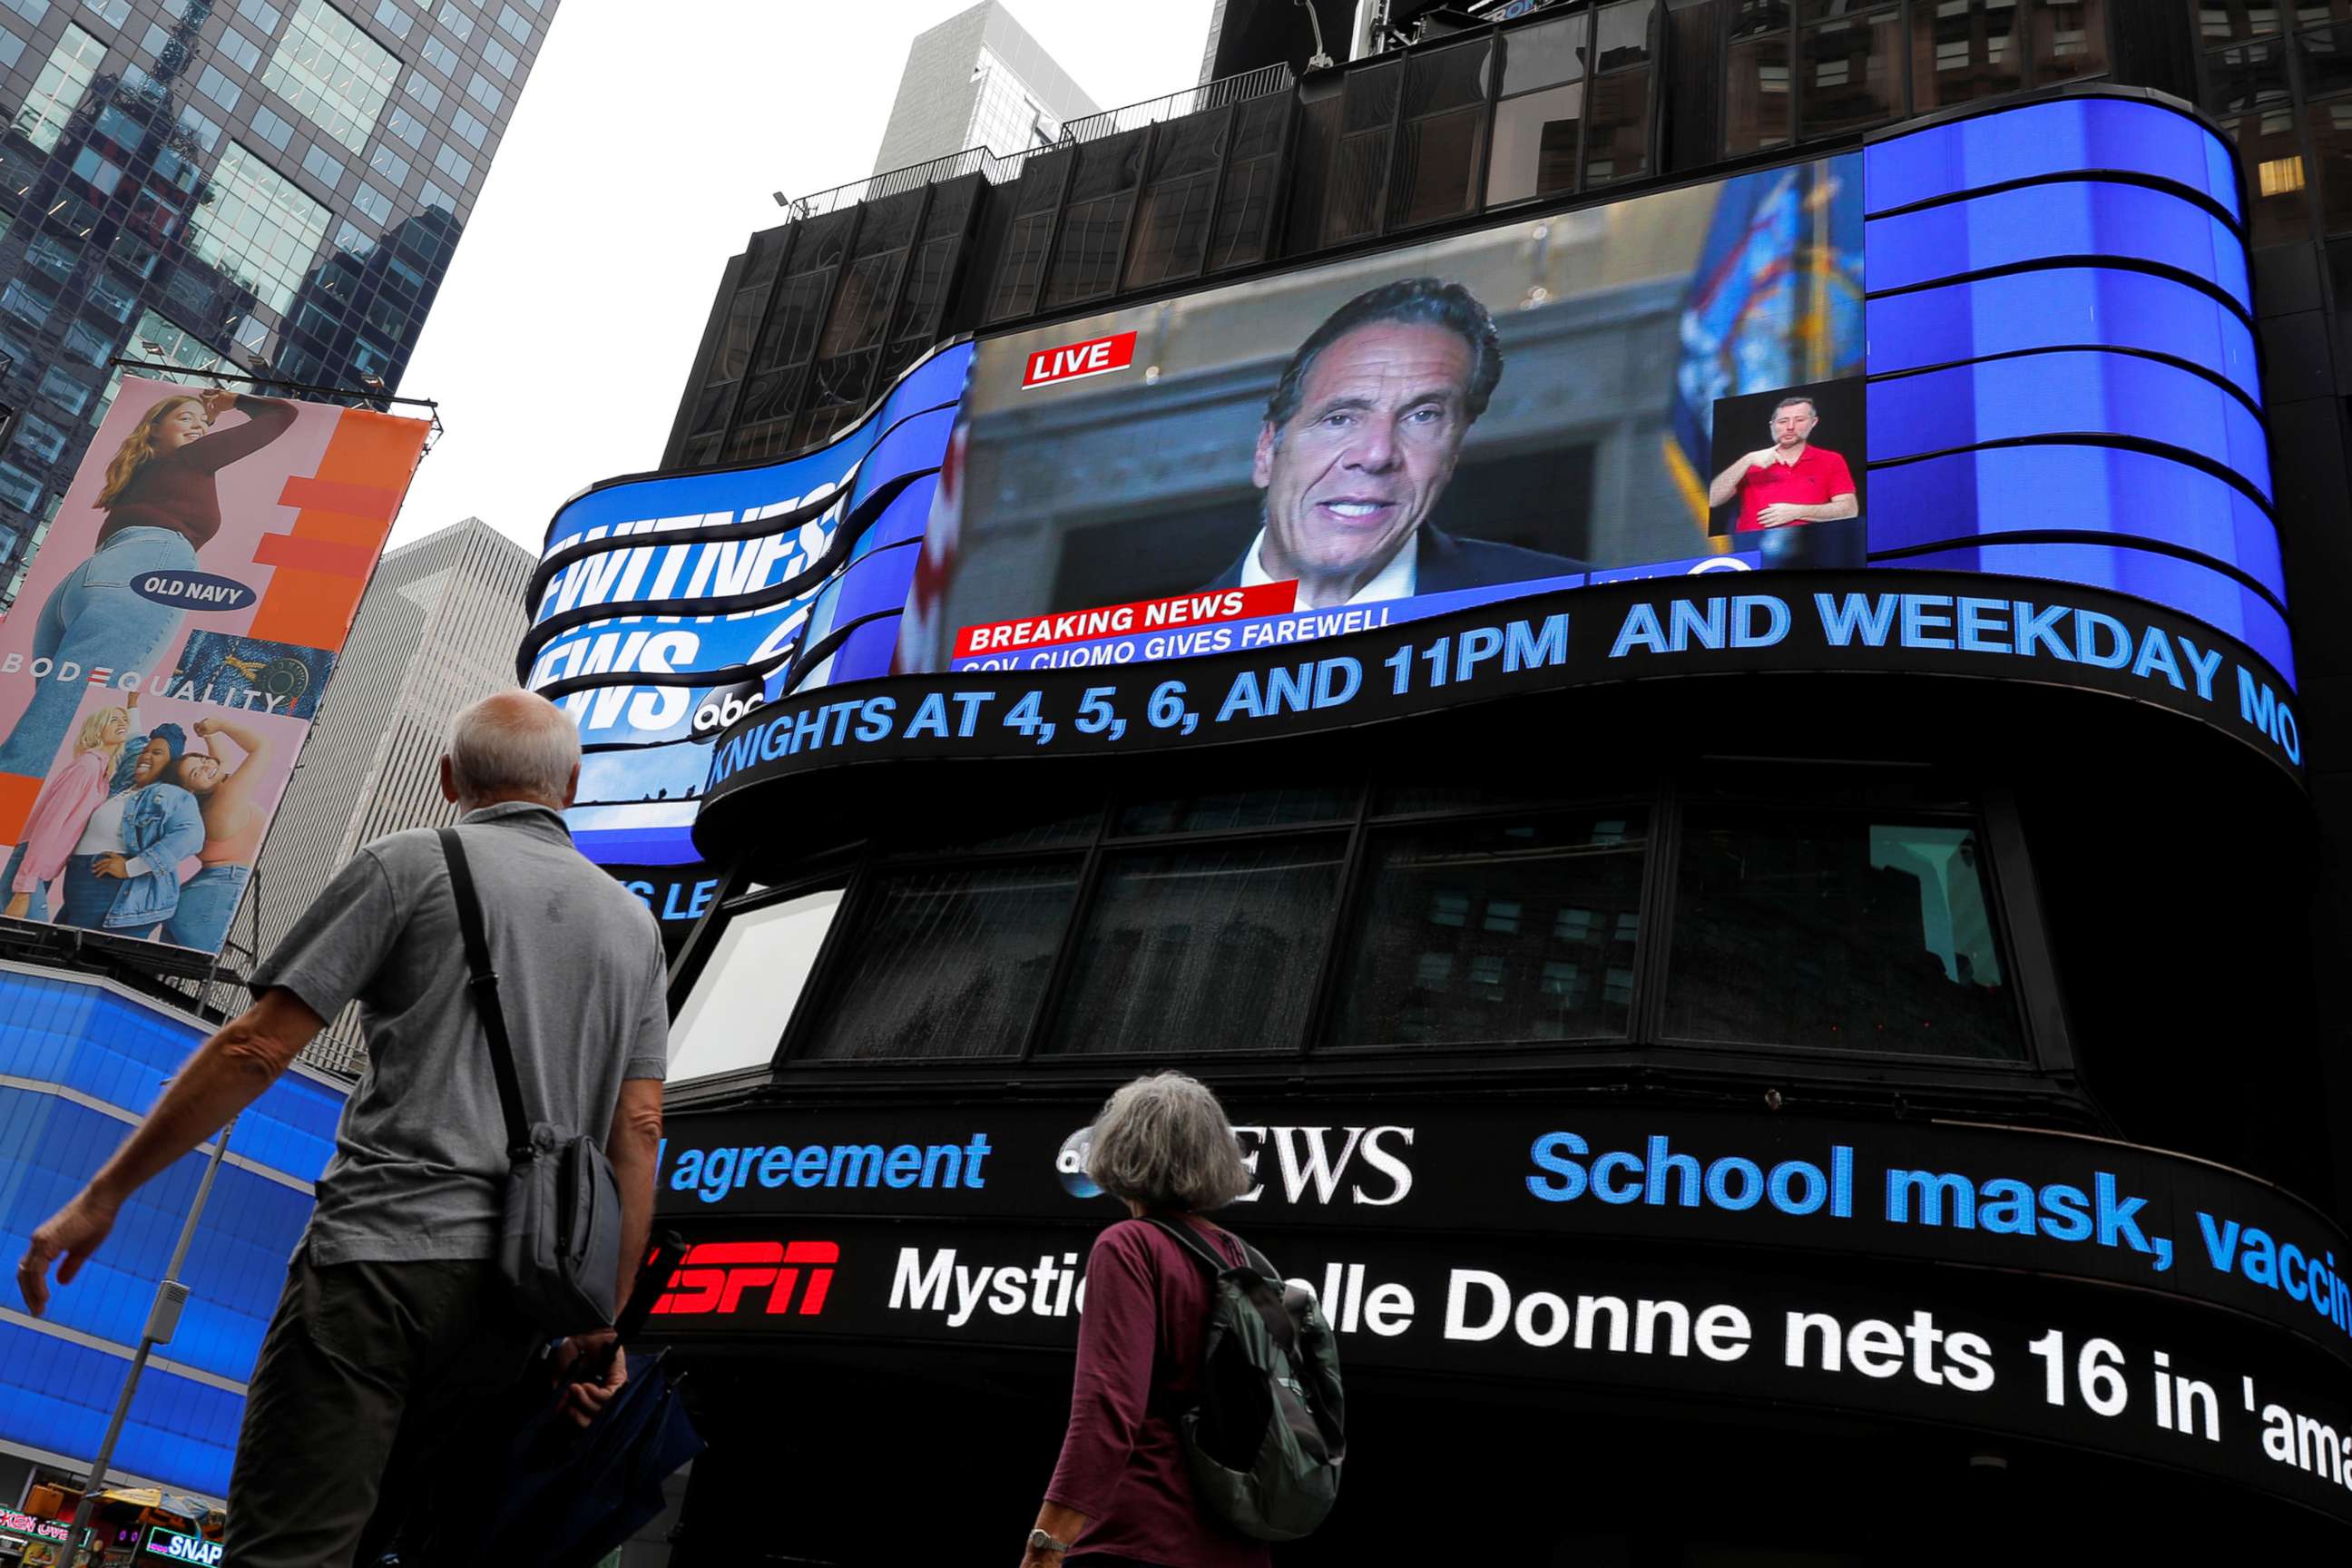 PHOTO: People walk by as a farewell speech by New York Governor Andrew Cuomo is broadcast live on a screen in Times Square on his final day in office in New York City, Aug. 23, 20201.